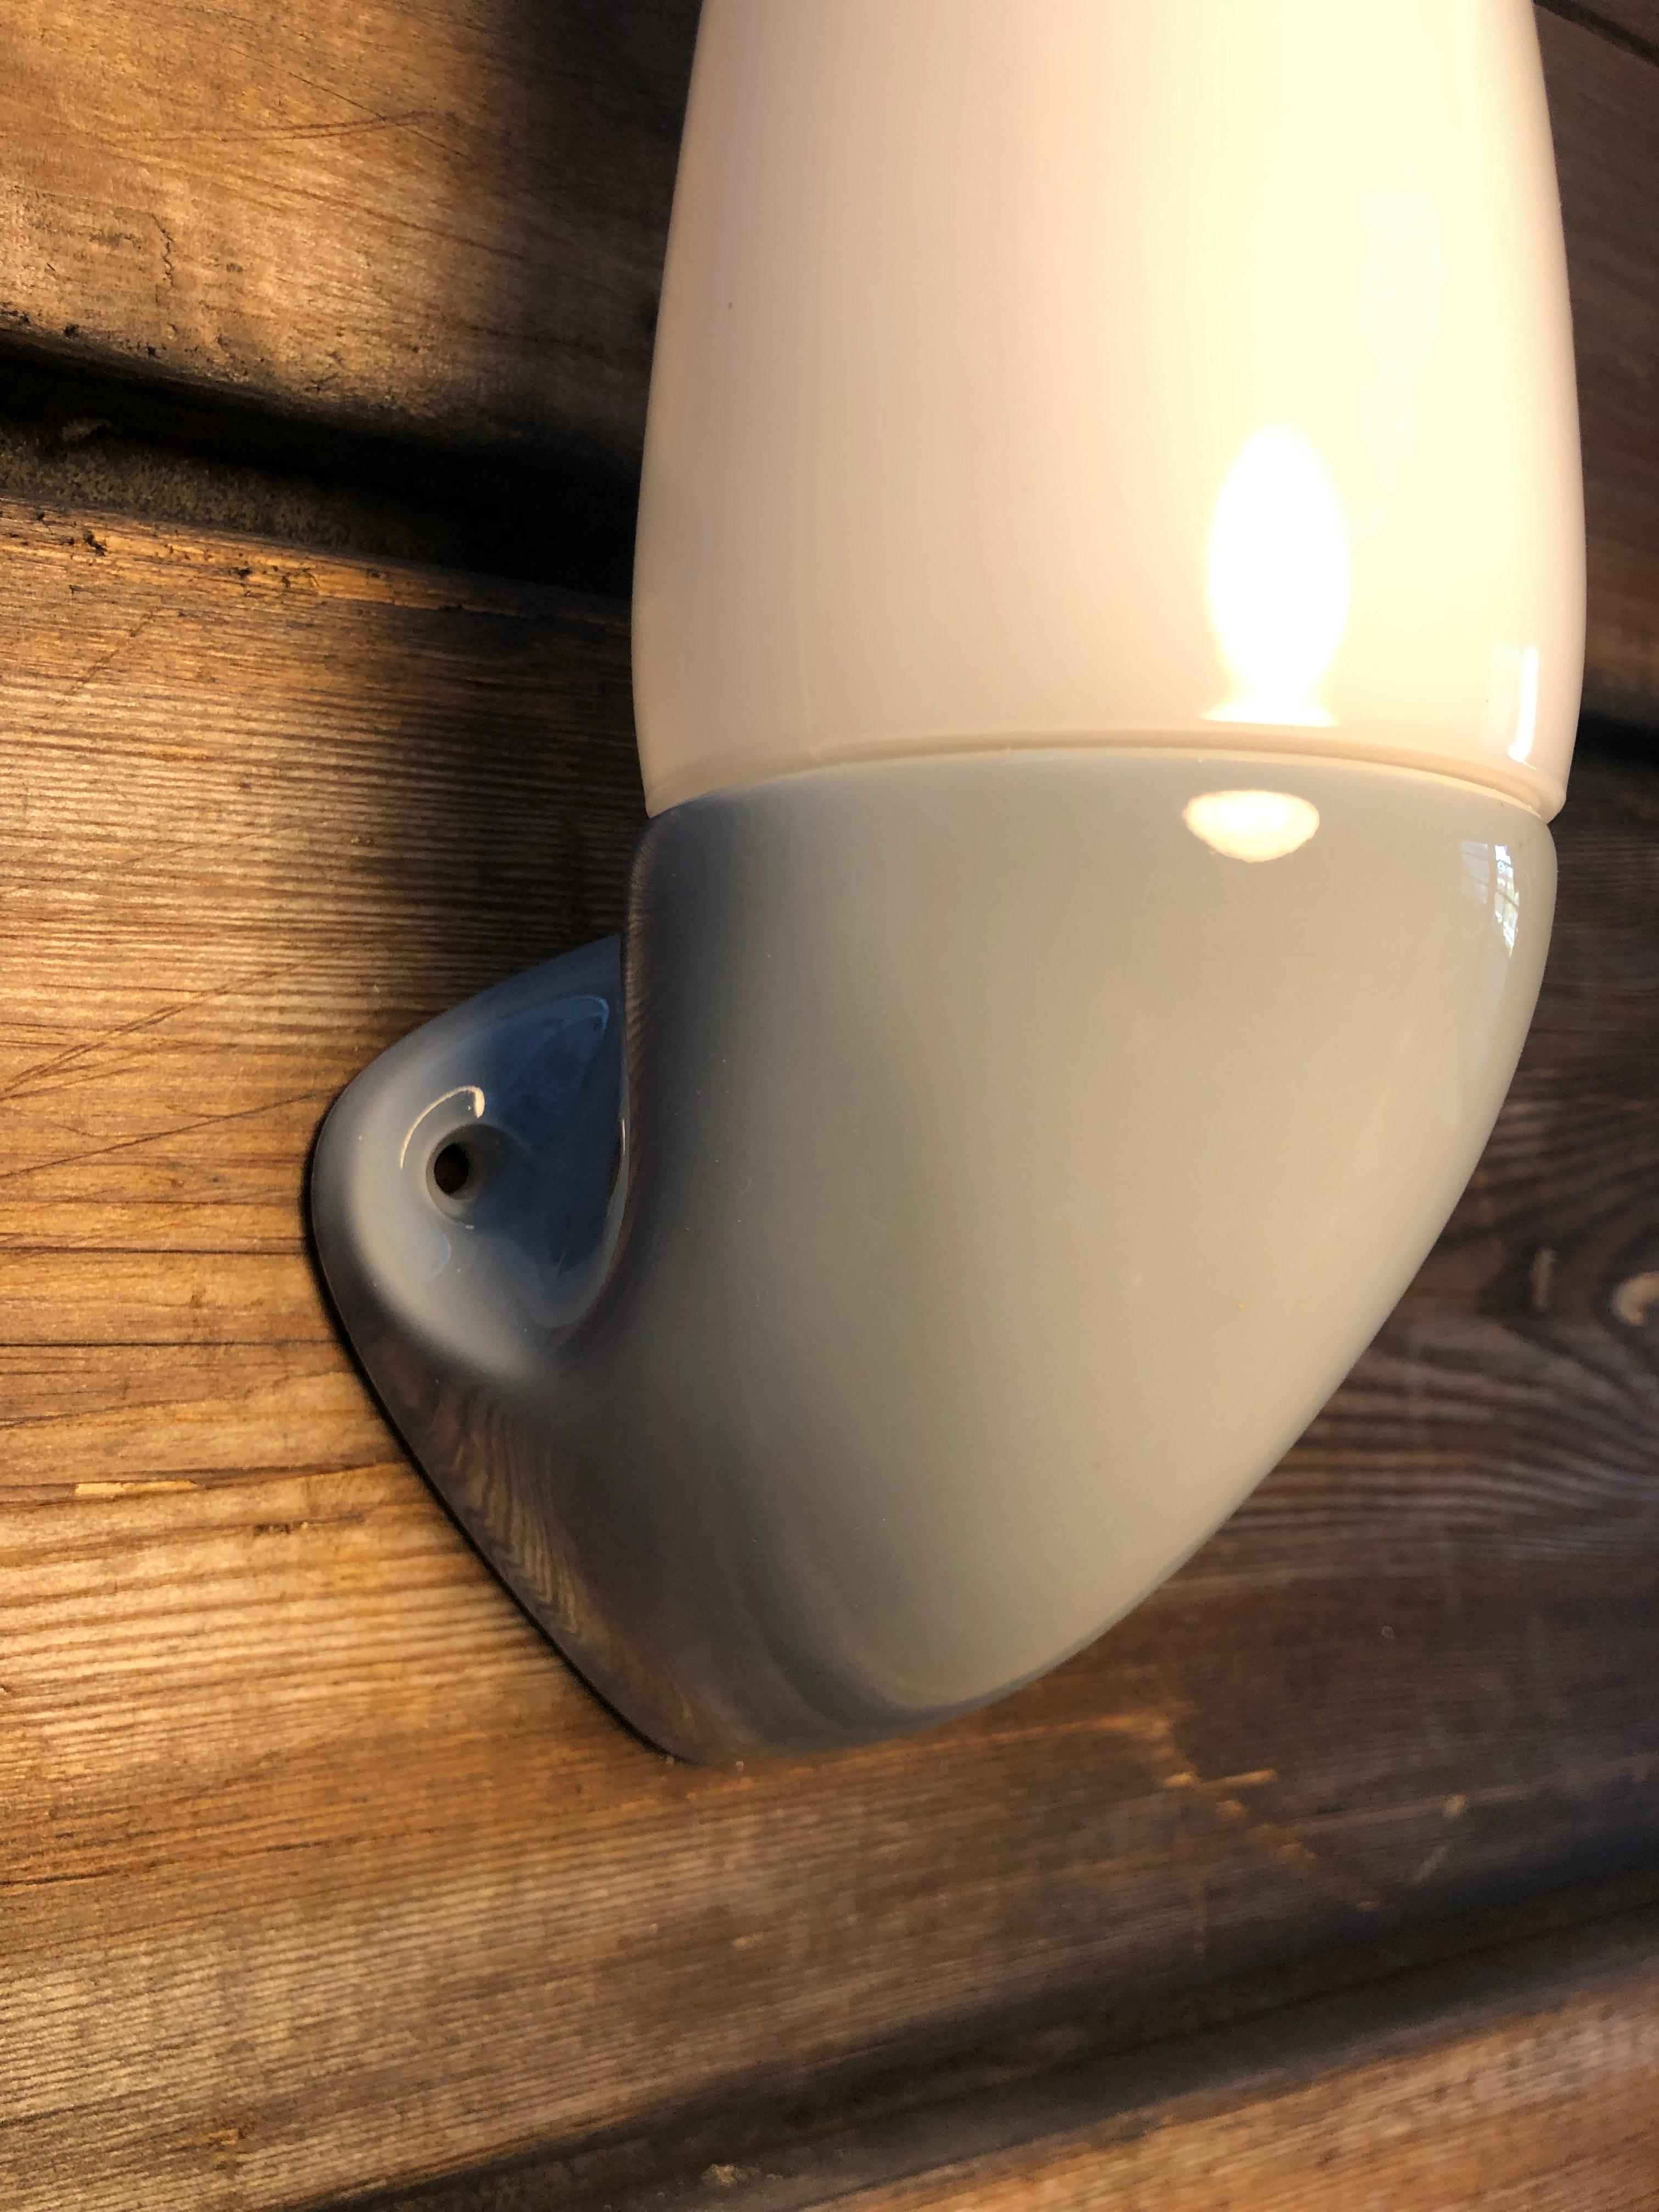 Mid-Century Modern Vintage Ifö of Sweden Ceramic Bathroom Lamps with Opaline Shades from the 1960s For Sale